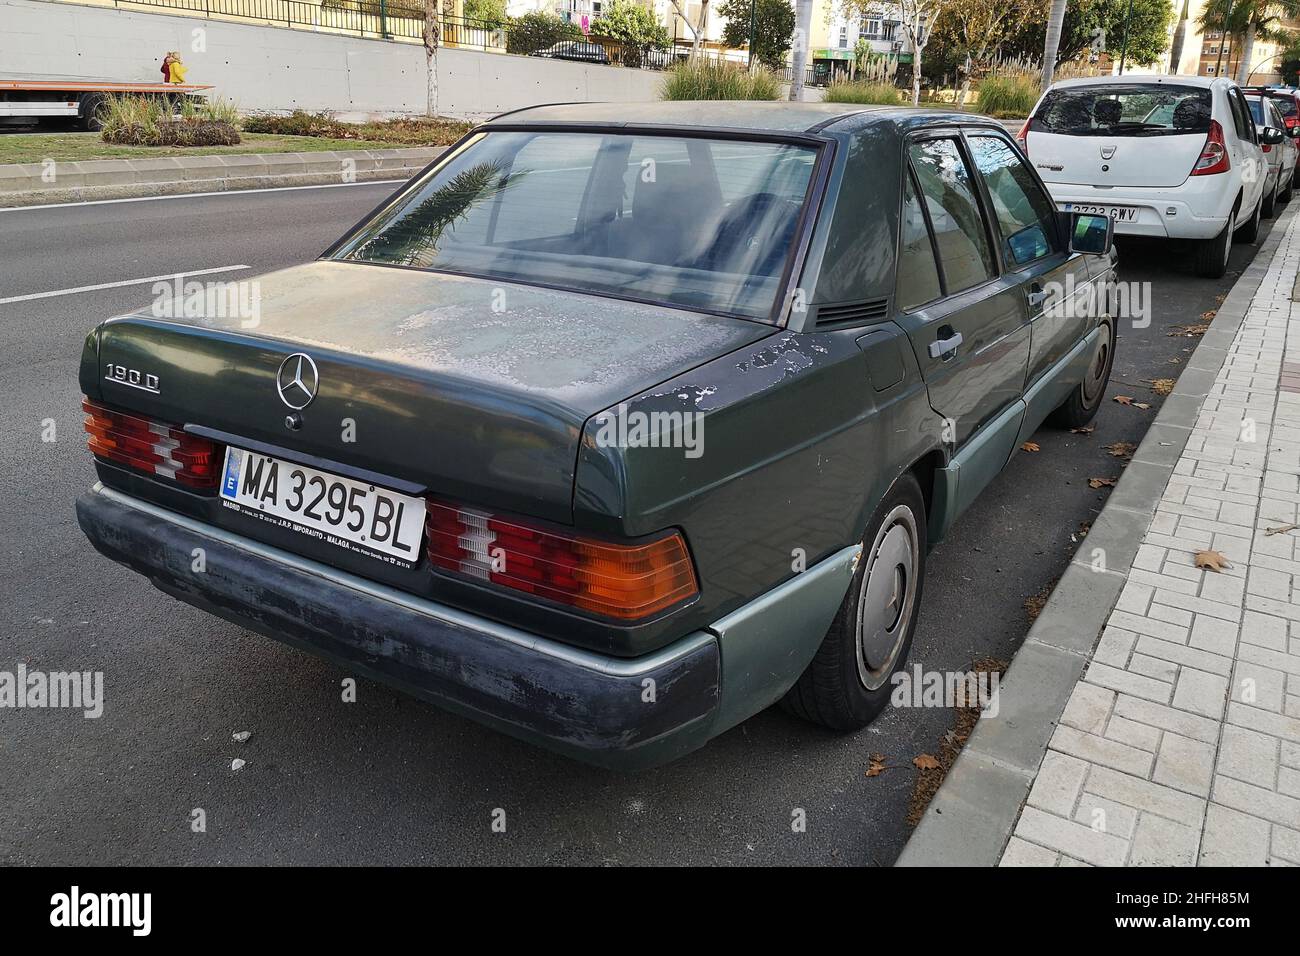 Mercedes 190D  (W201) parked in Malaga, Spain. Stock Photo